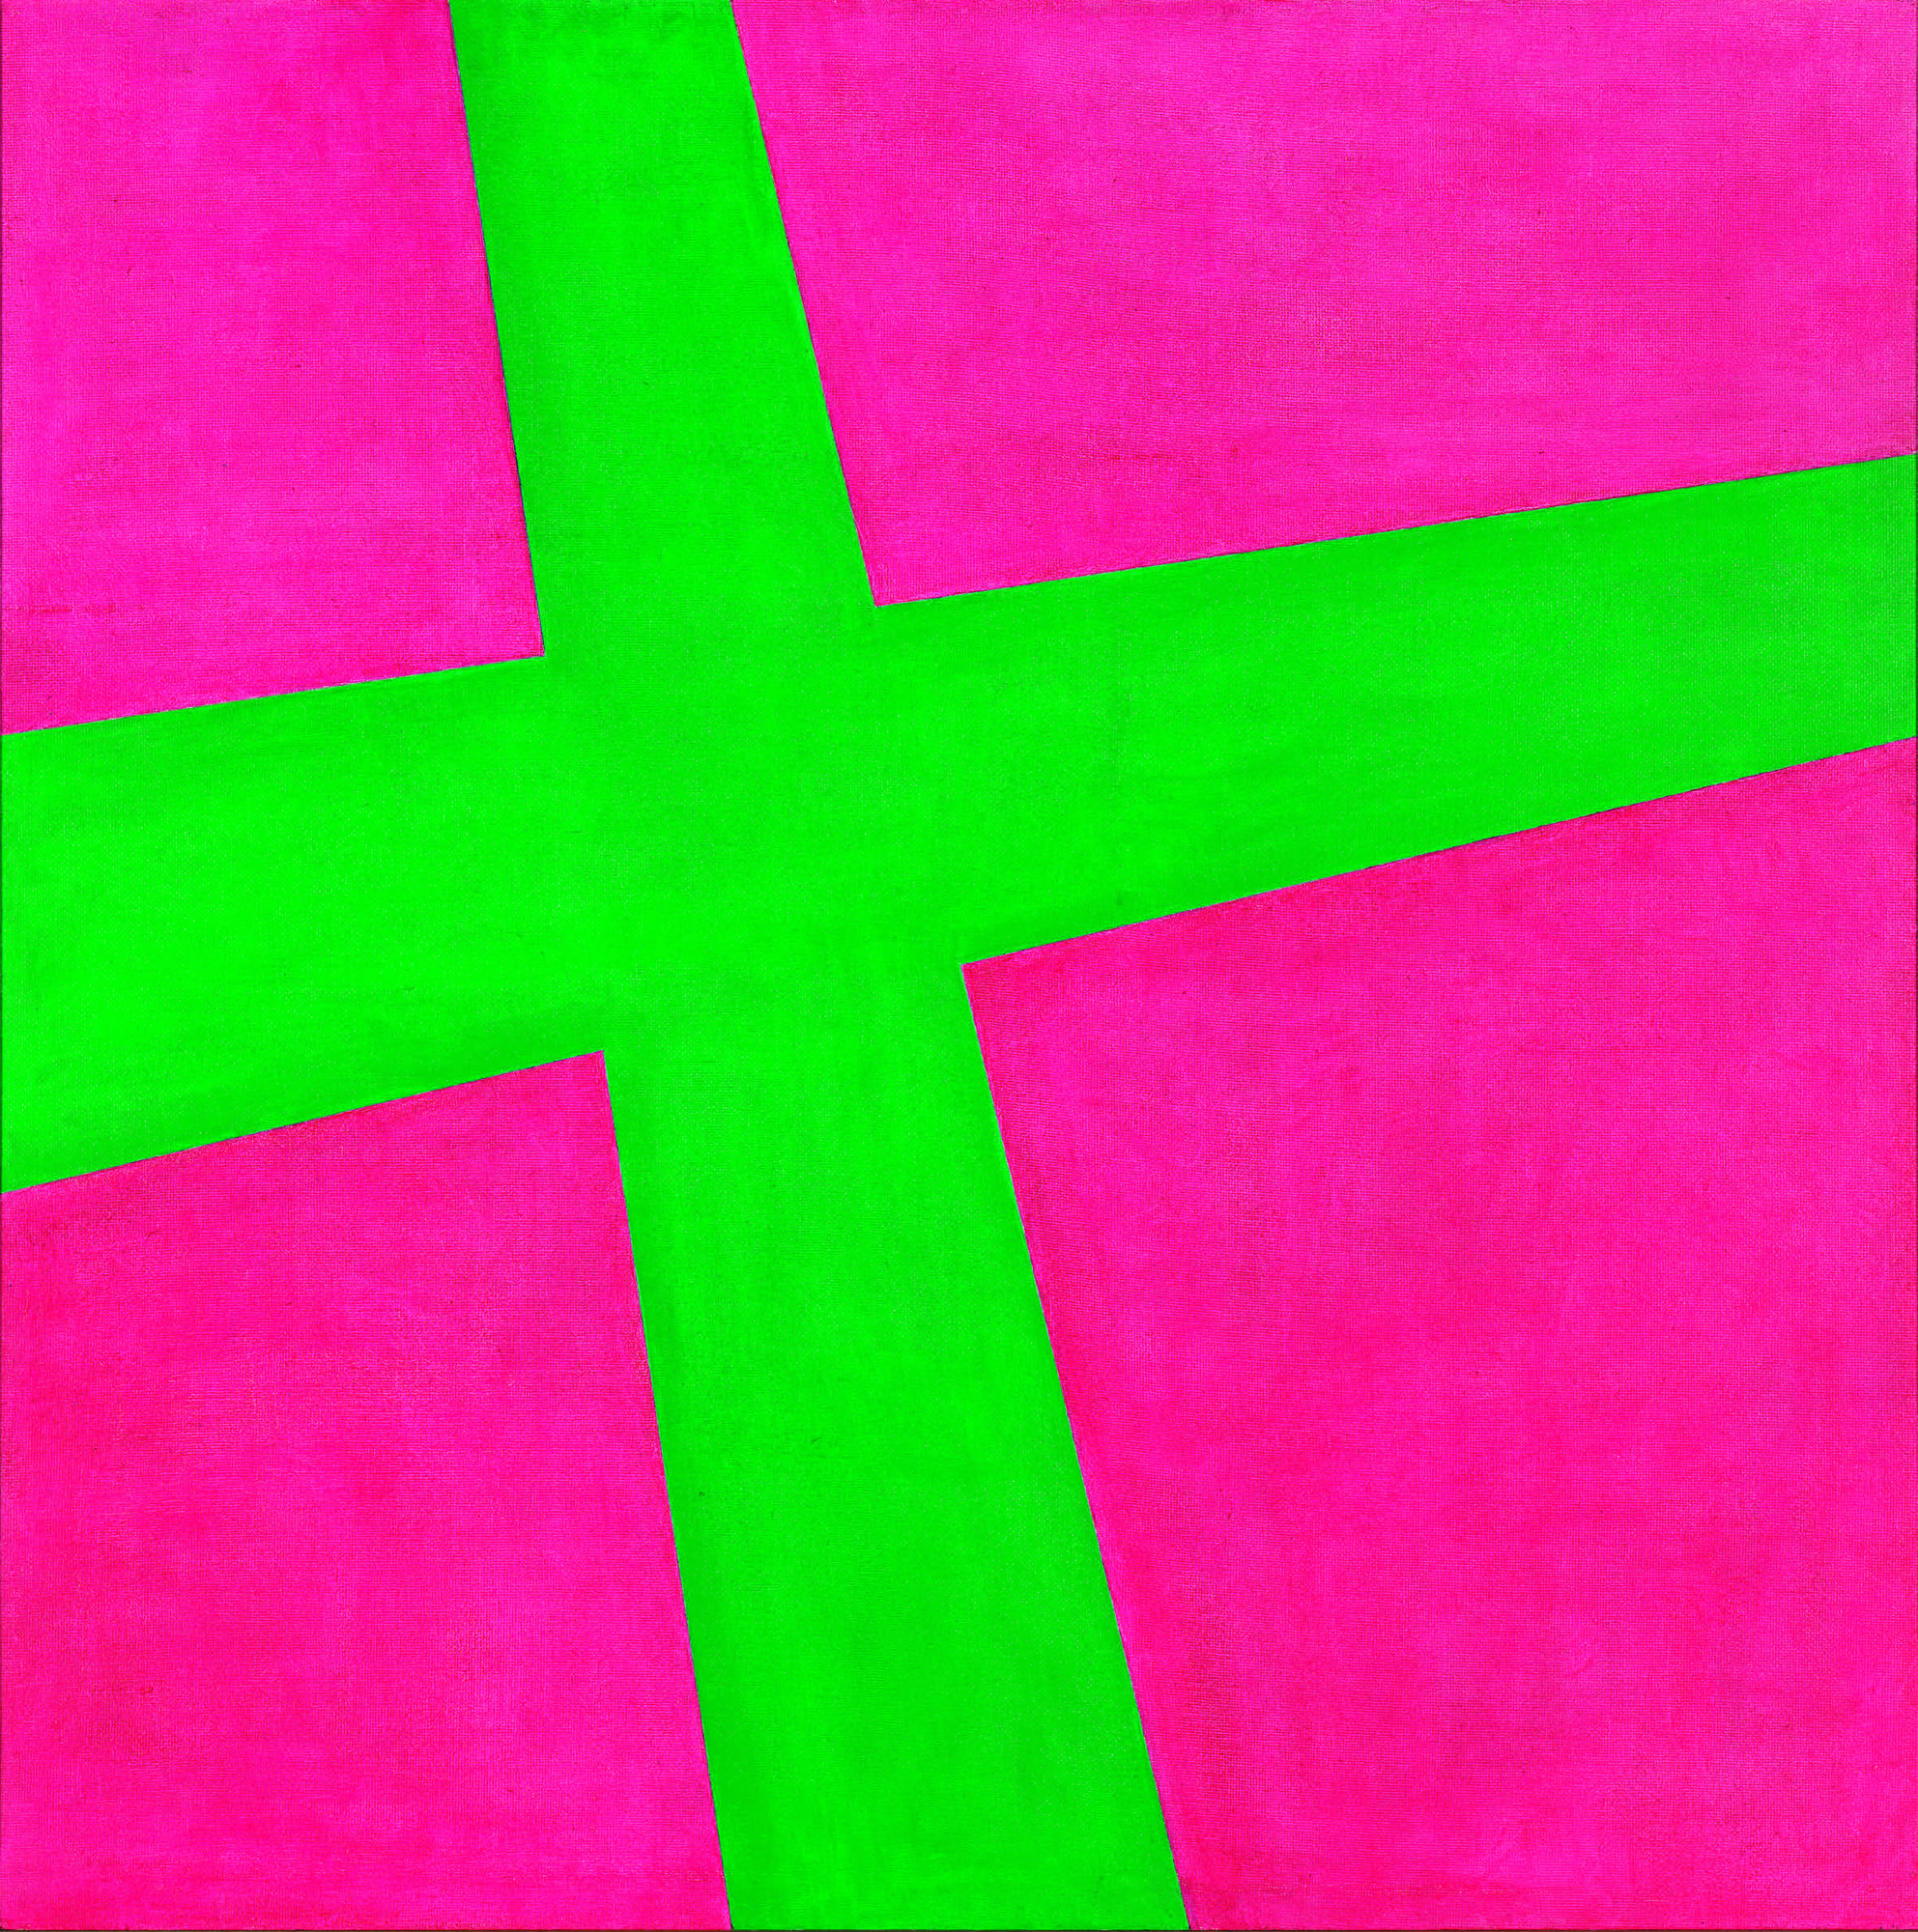 Gunter Christmann, <em>Red/Green Cross</em>,  1966, oil on composition board, 122 x 122 cm, National Gallery of Victoria, Melbourne, Purchased 1992, © Estate of Gunter Christmann and Niagara Galleries, Melbourne.